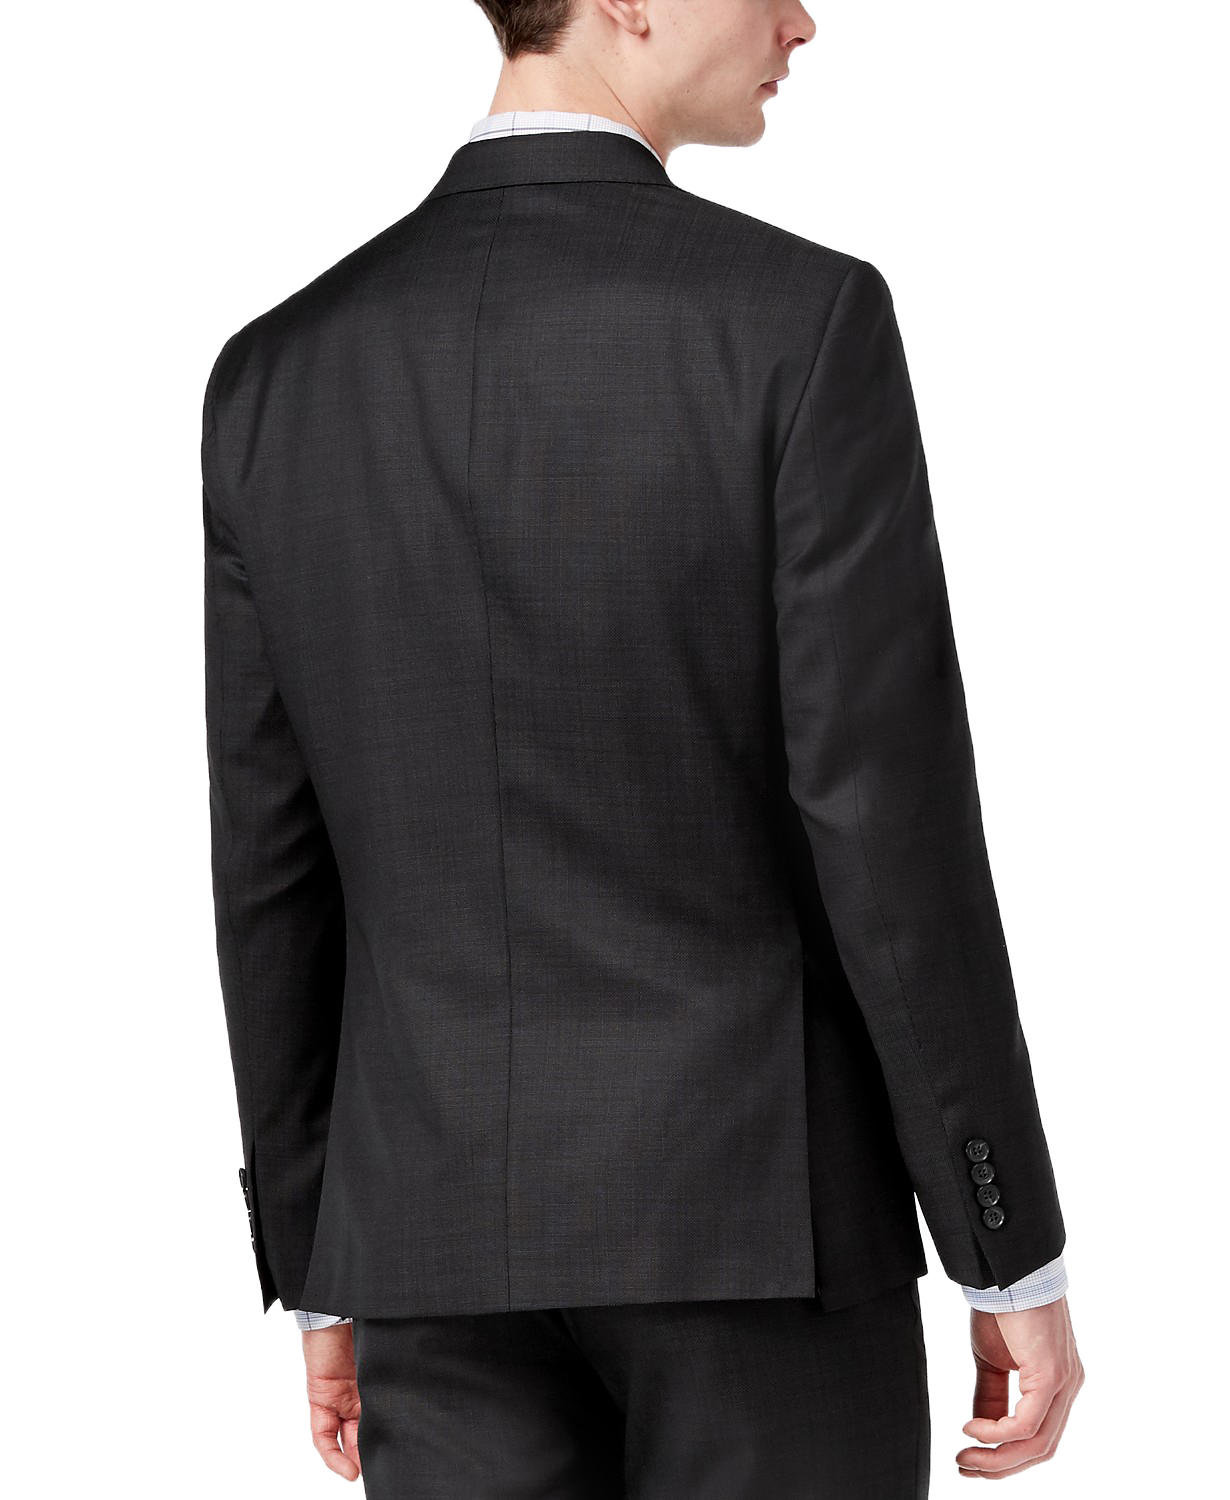 www.couturepoint.com-dkny-mens-black-wool-modern-fit-stretch-textured-short-suit-jacket